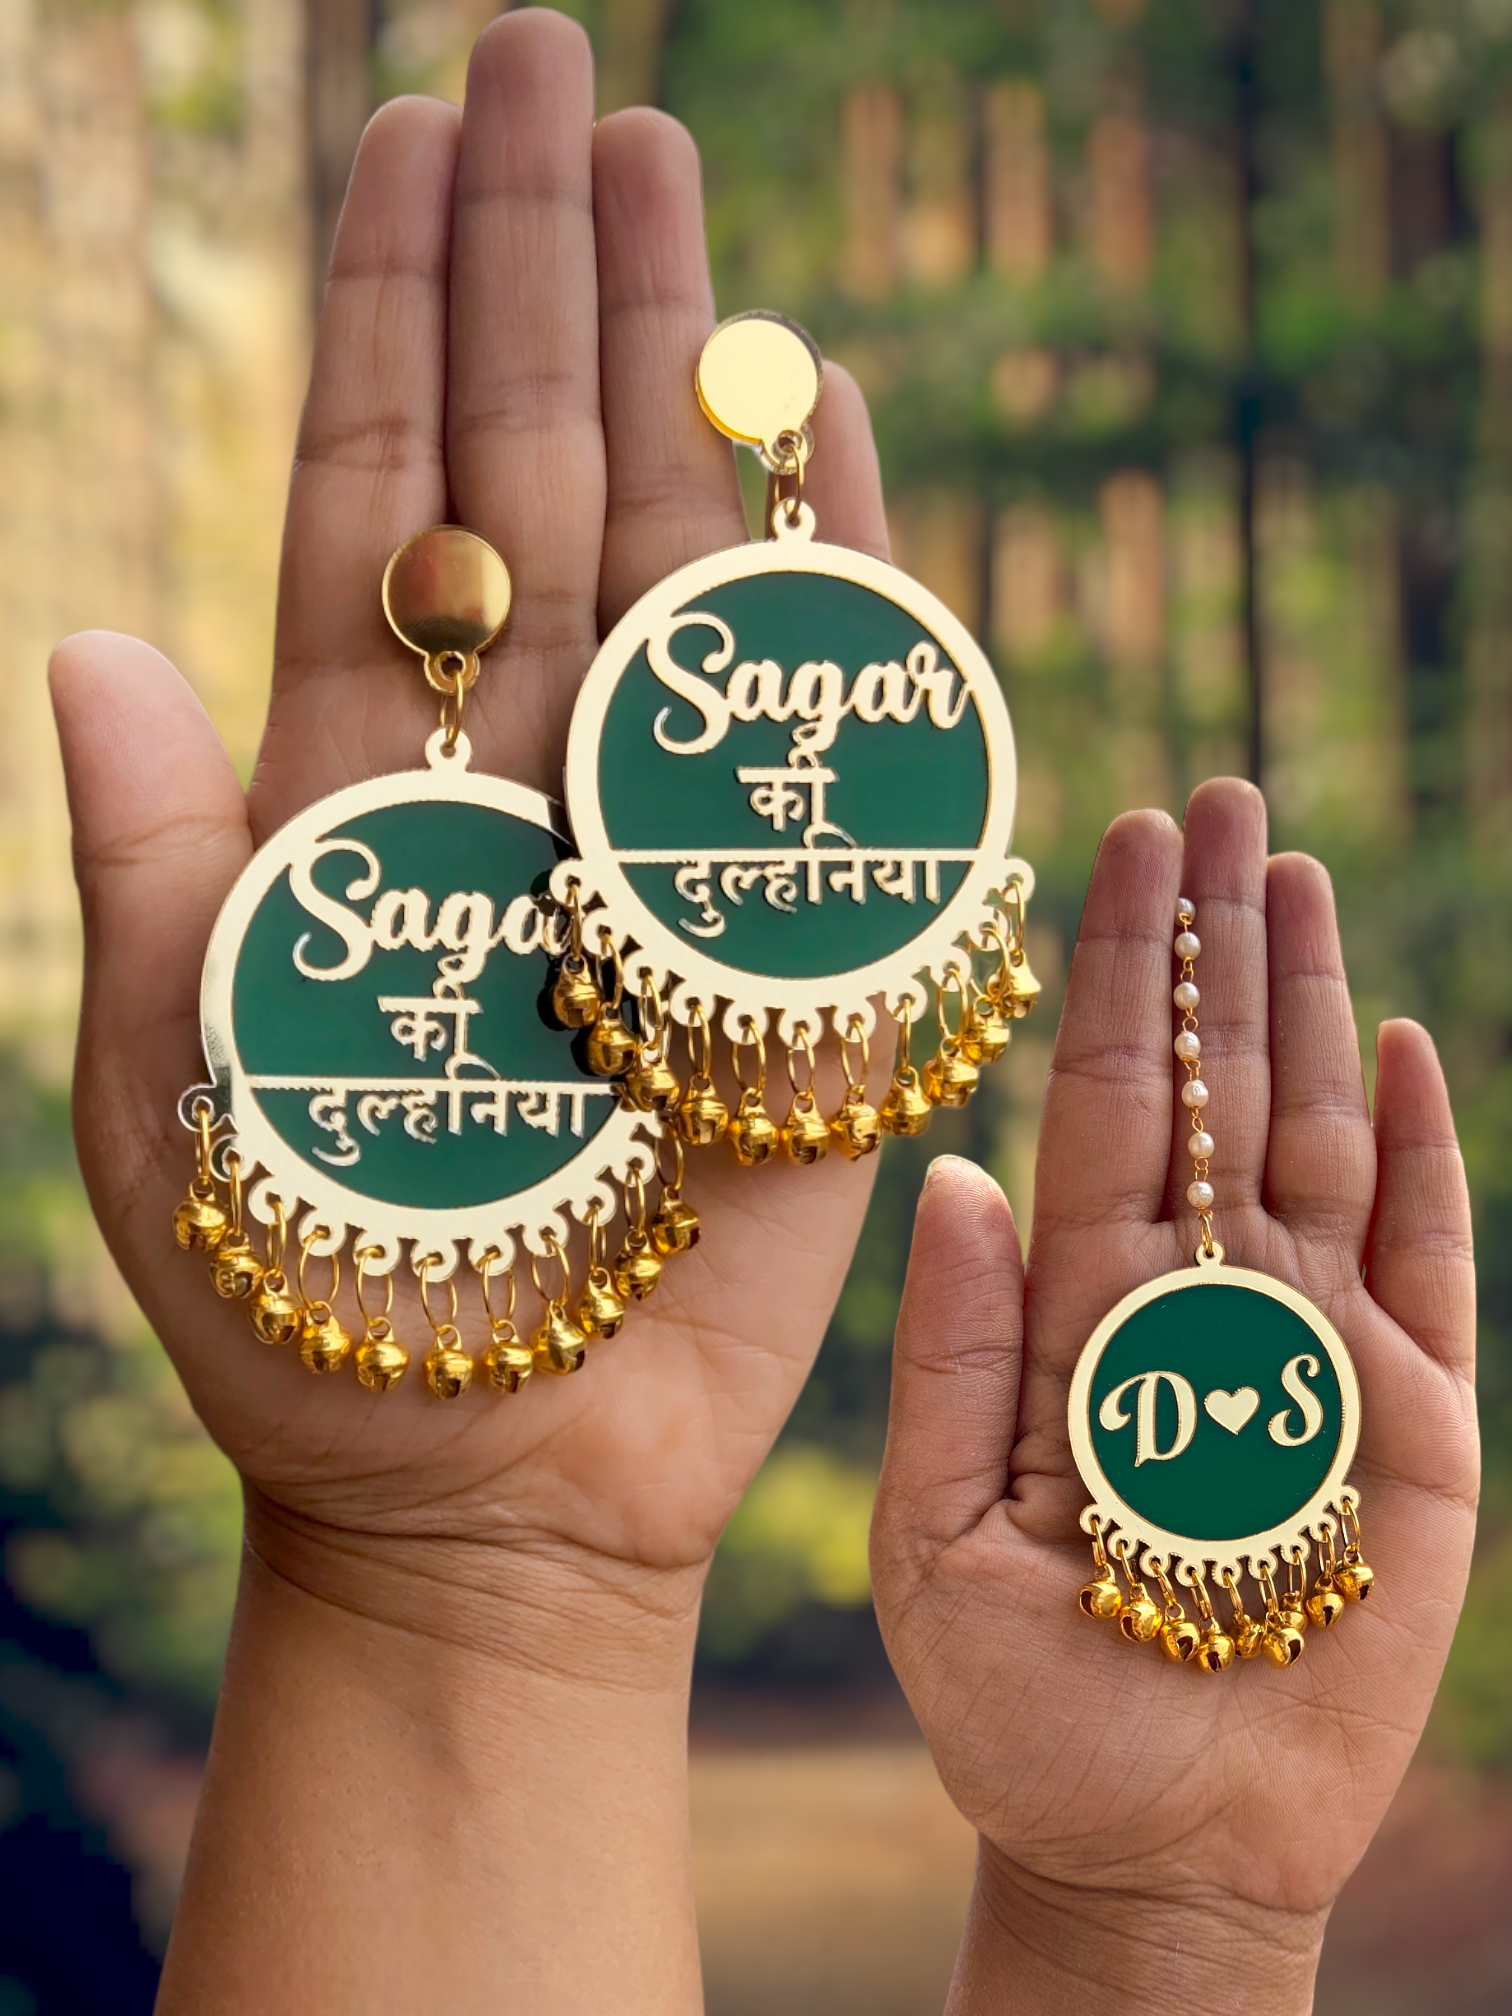 Golden Ghungroo-embellished Dulhaniya earrings and a small green maang tikka. Customized text in golden adds a personalized touch. The intricate design includes a tassel of golden Ghungroo (bells), adding a unique and elegant element to the bridal accessories